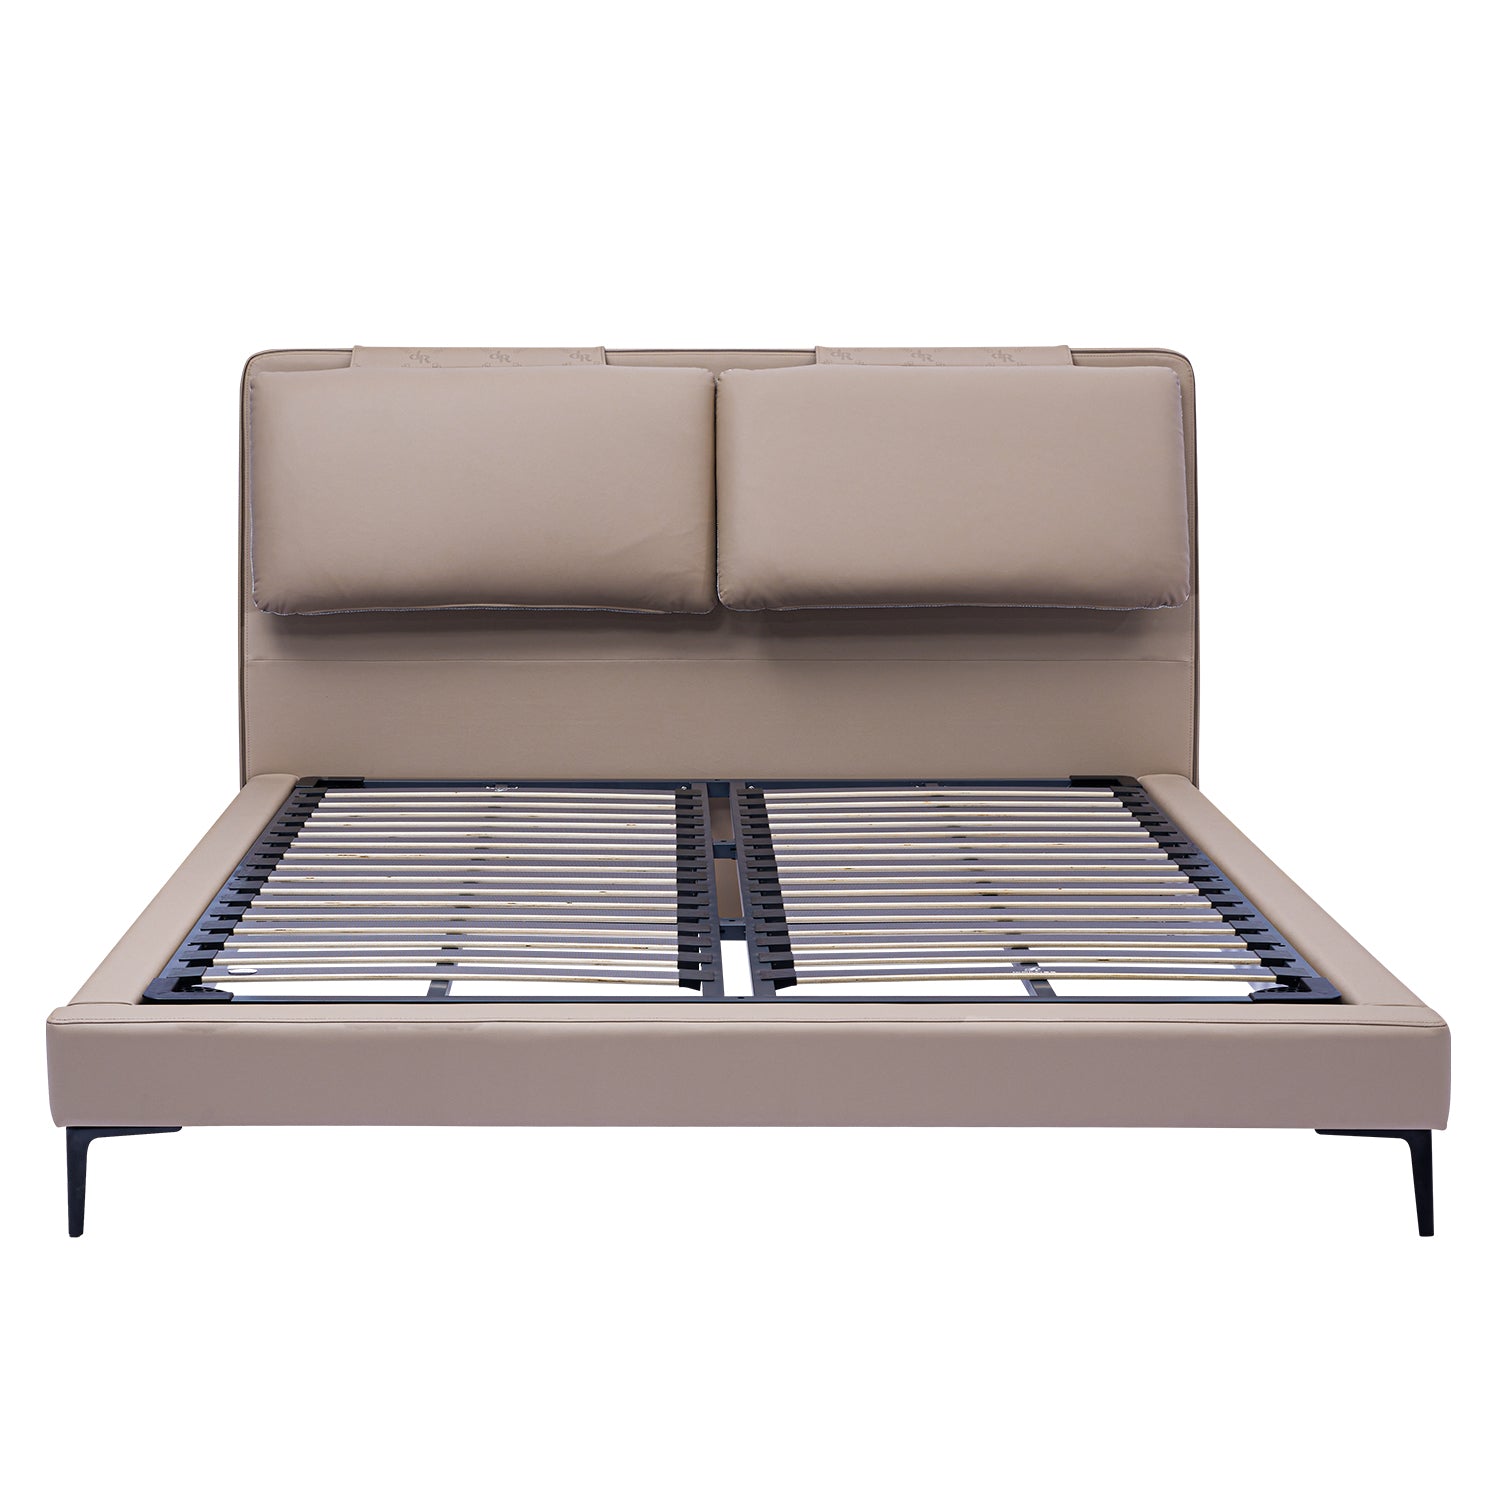 Beige leather bed frame with cushioned headboard and sturdy slat system, ideal for modern bedroom decor.